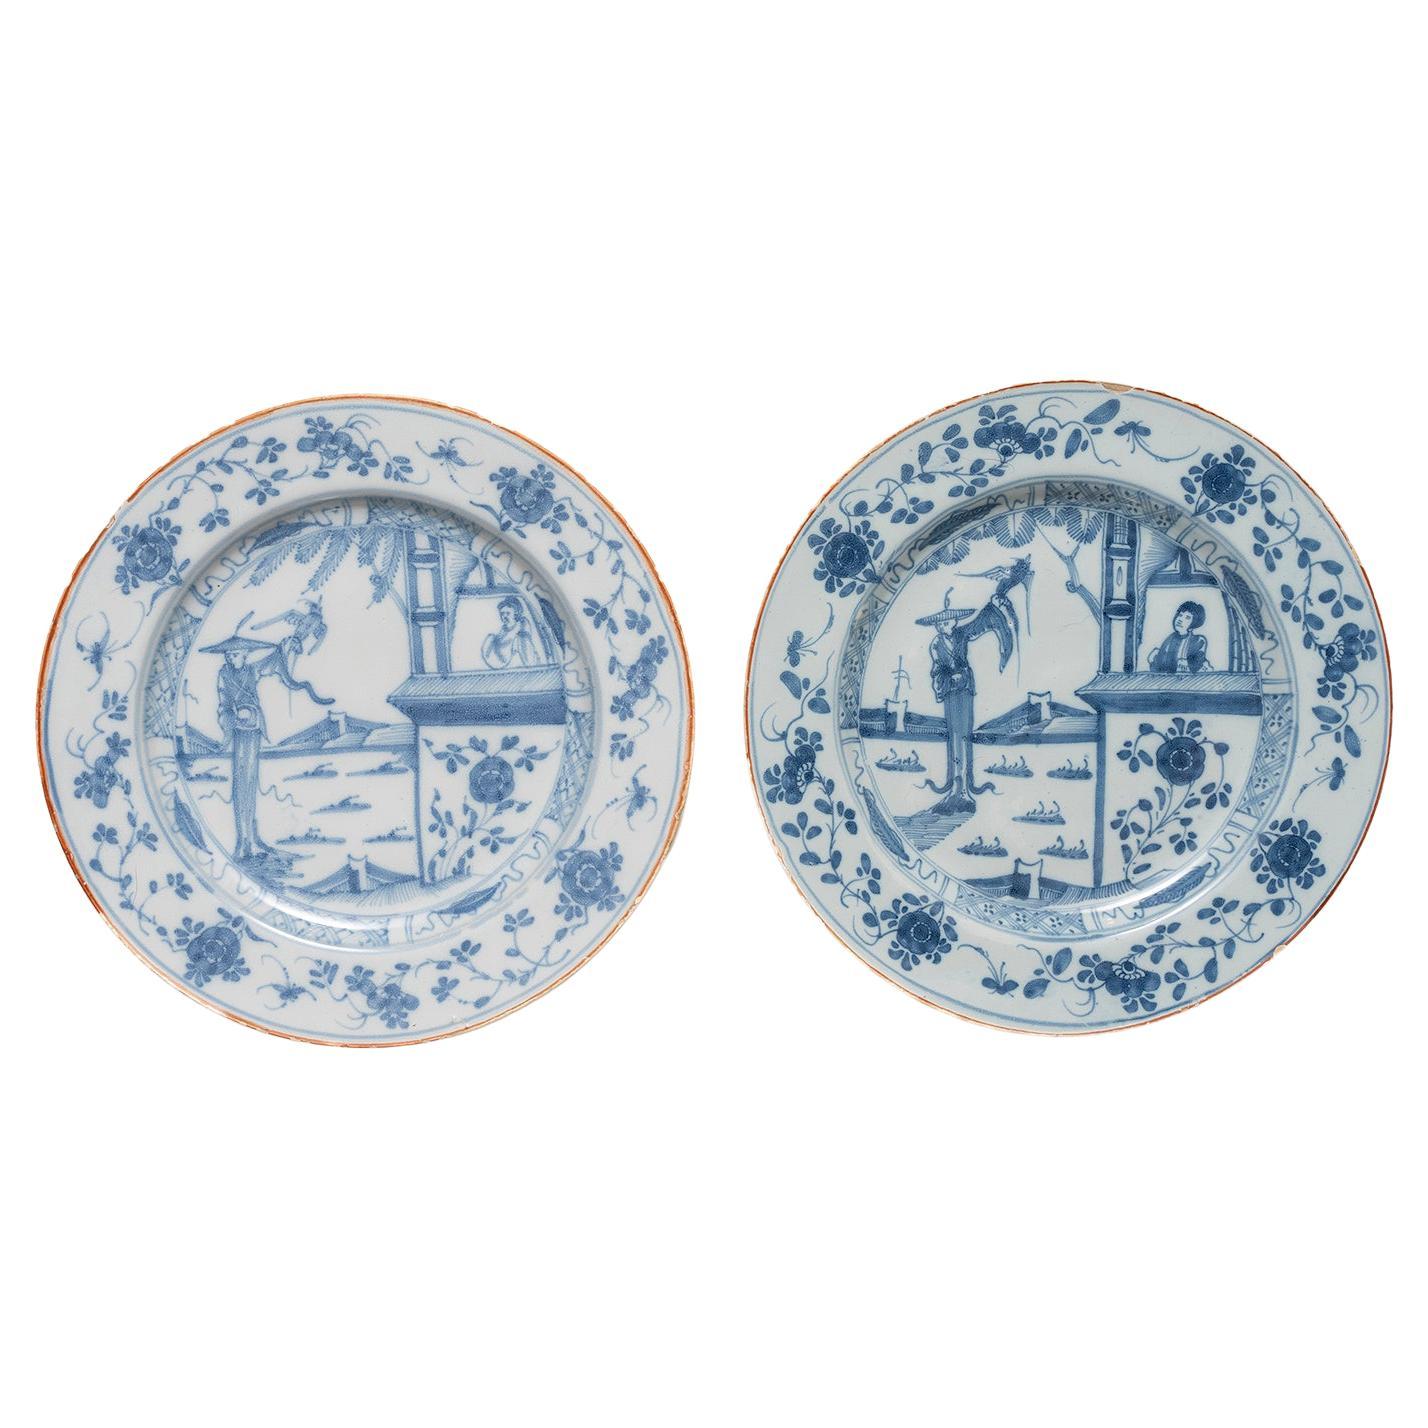 Plates pair delftware English Liverpool blue white chinoiserie tall lady